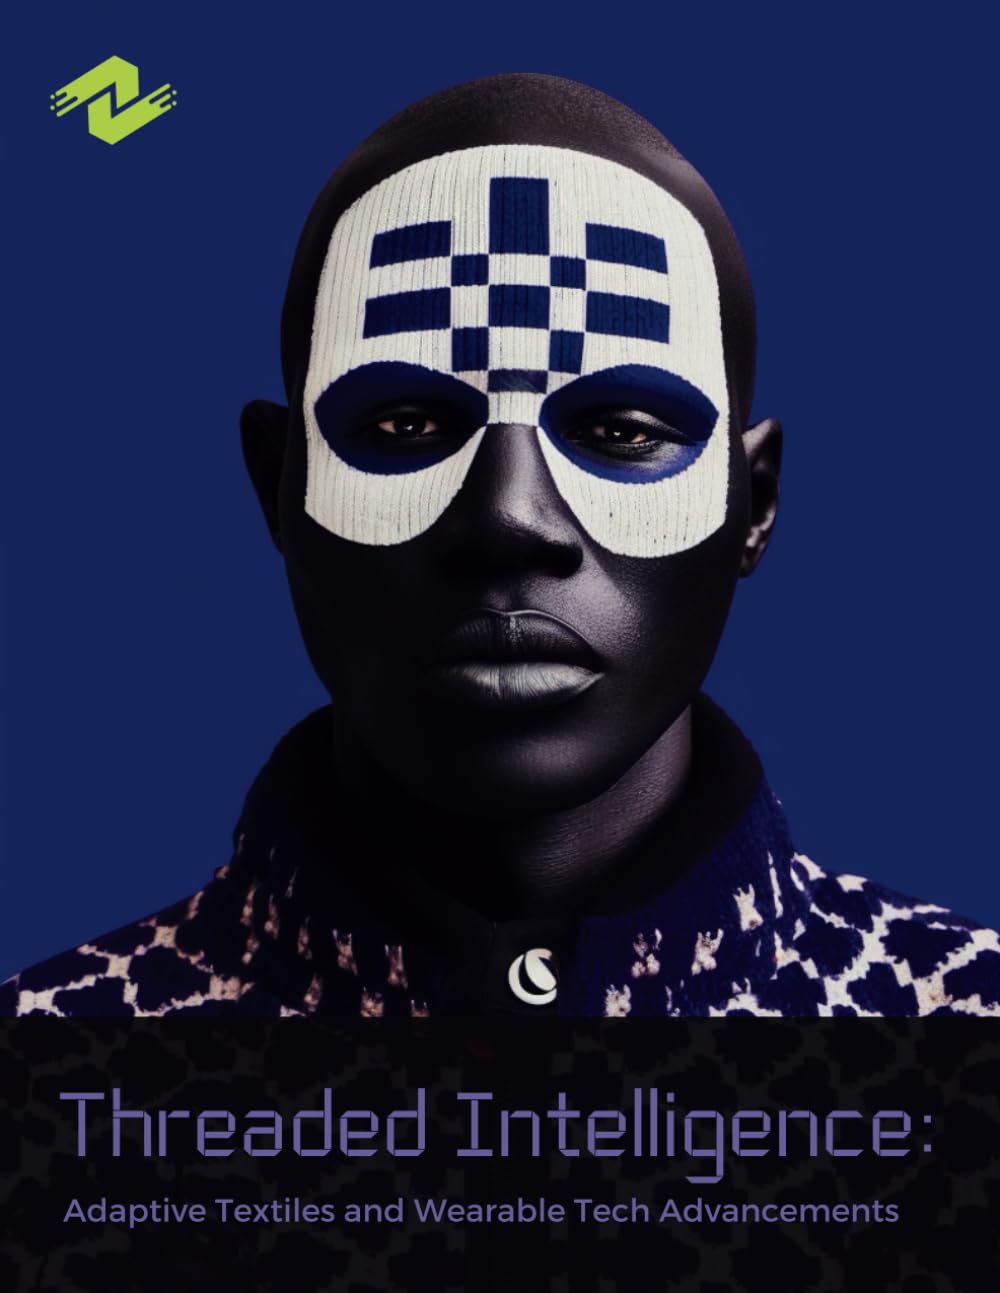 Threaded Intelligence: Adaptive Textiles and Wearable Tech Advancements: Exploring the Fabric of Tomorrow